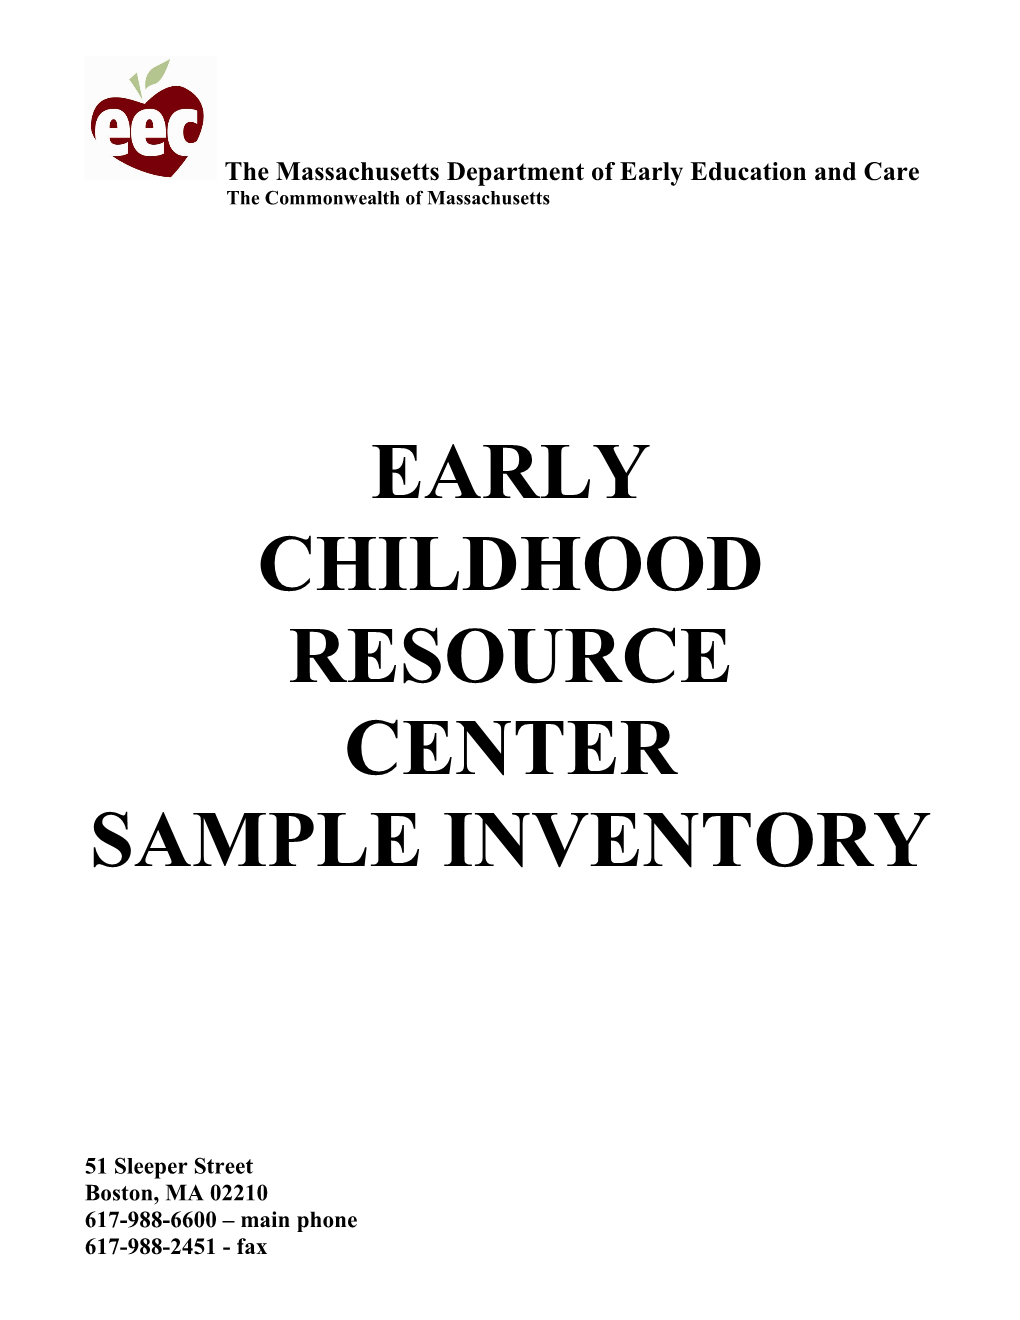 Early Childhood Resource Centers